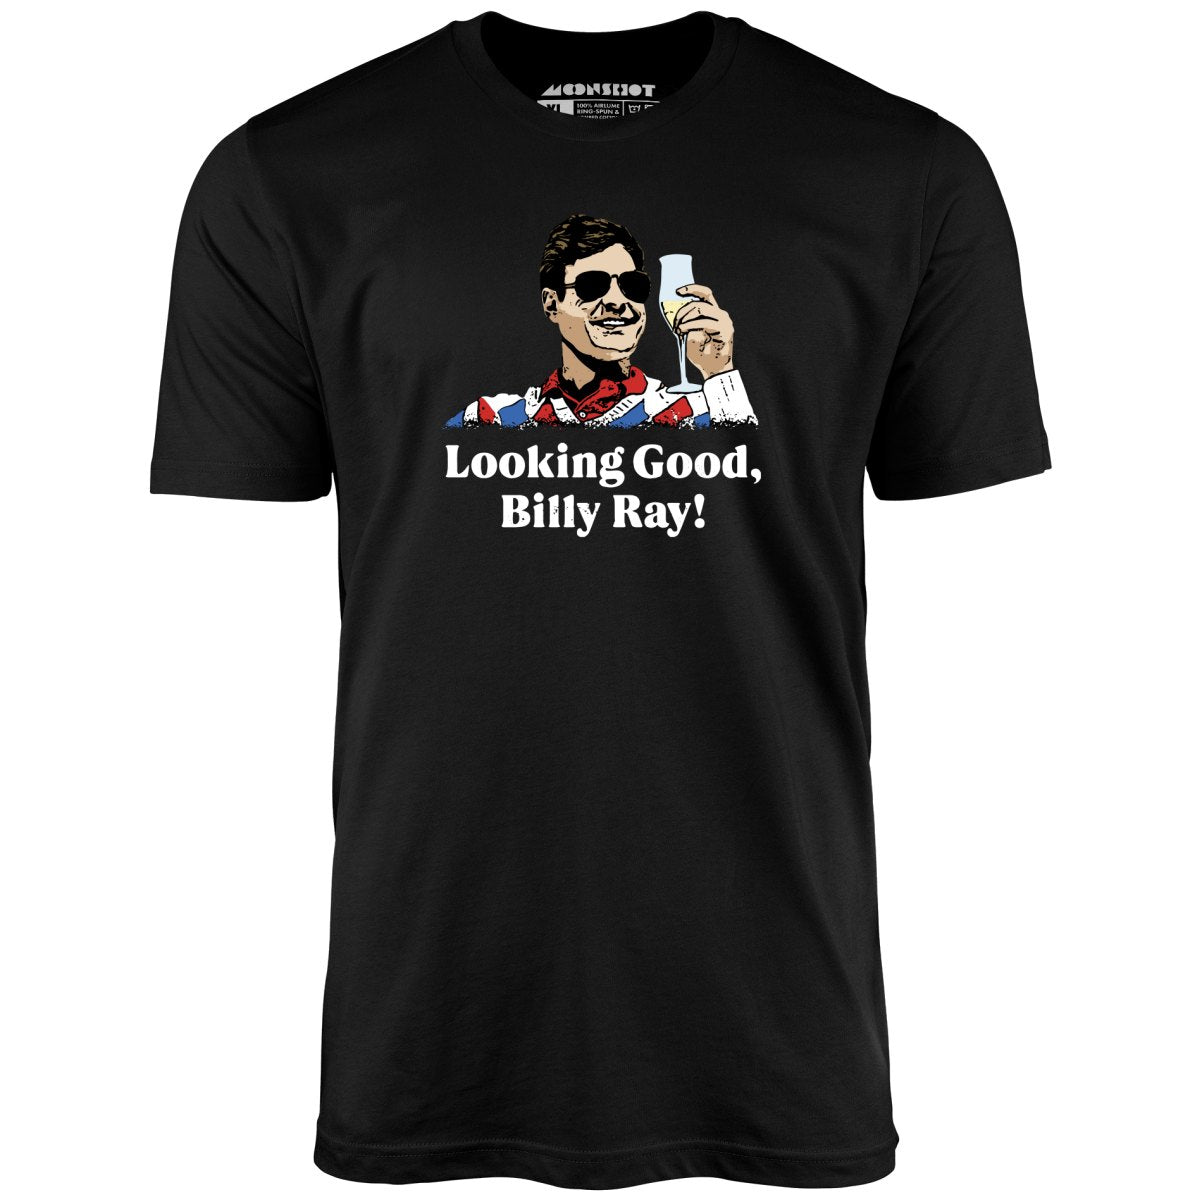 Looking Good, Billy Ray! - Unisex T-Shirt